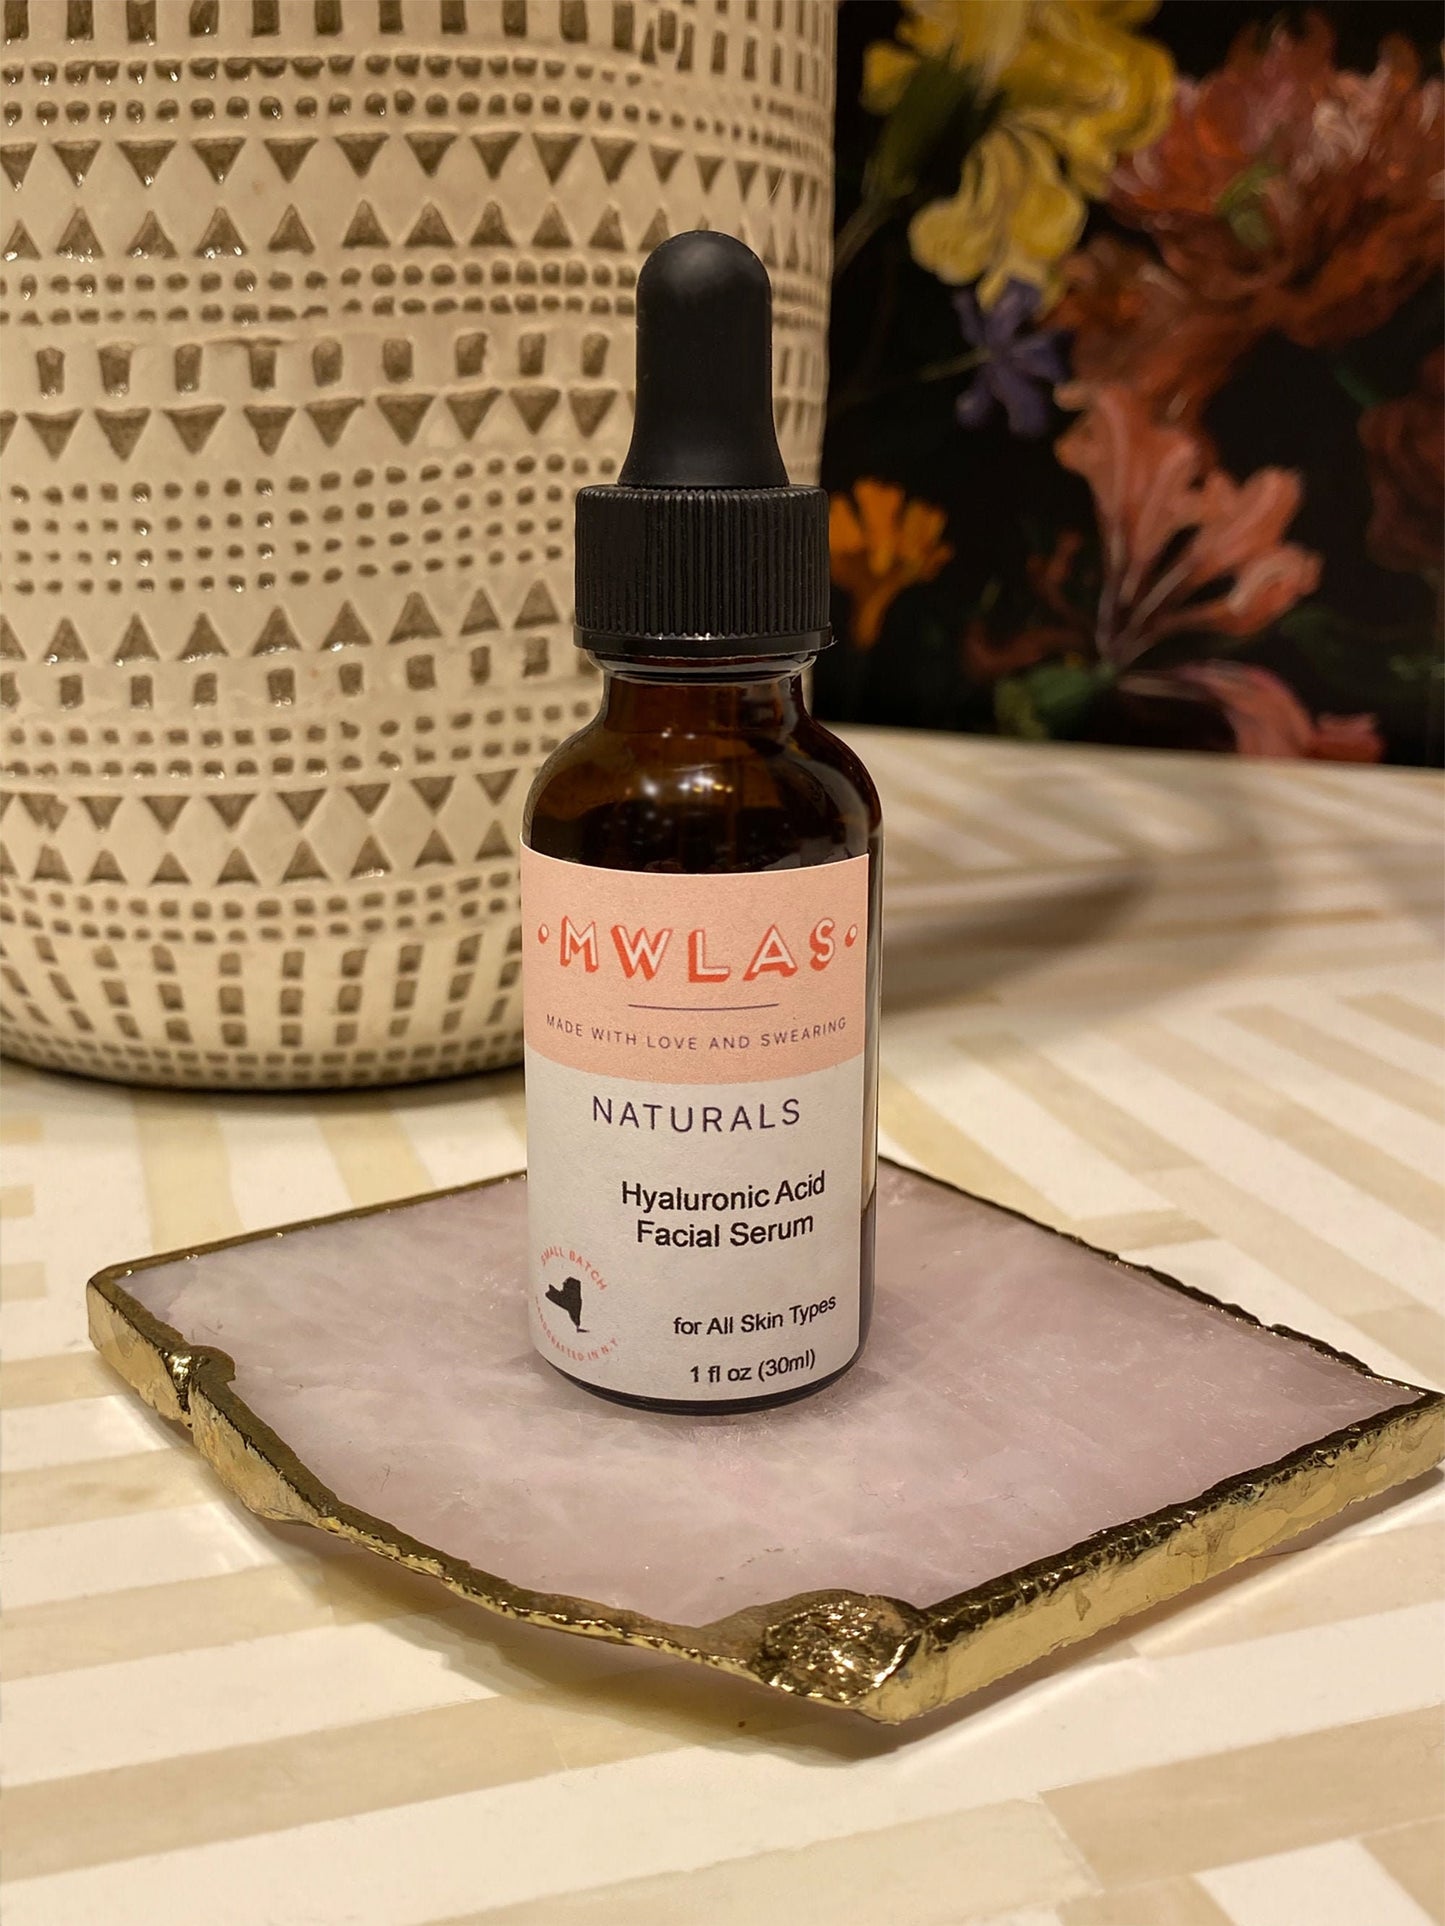 Hyaluronic Acid Serum | Routine Step 4 | Fragrance Free and Vitamin C Options Available